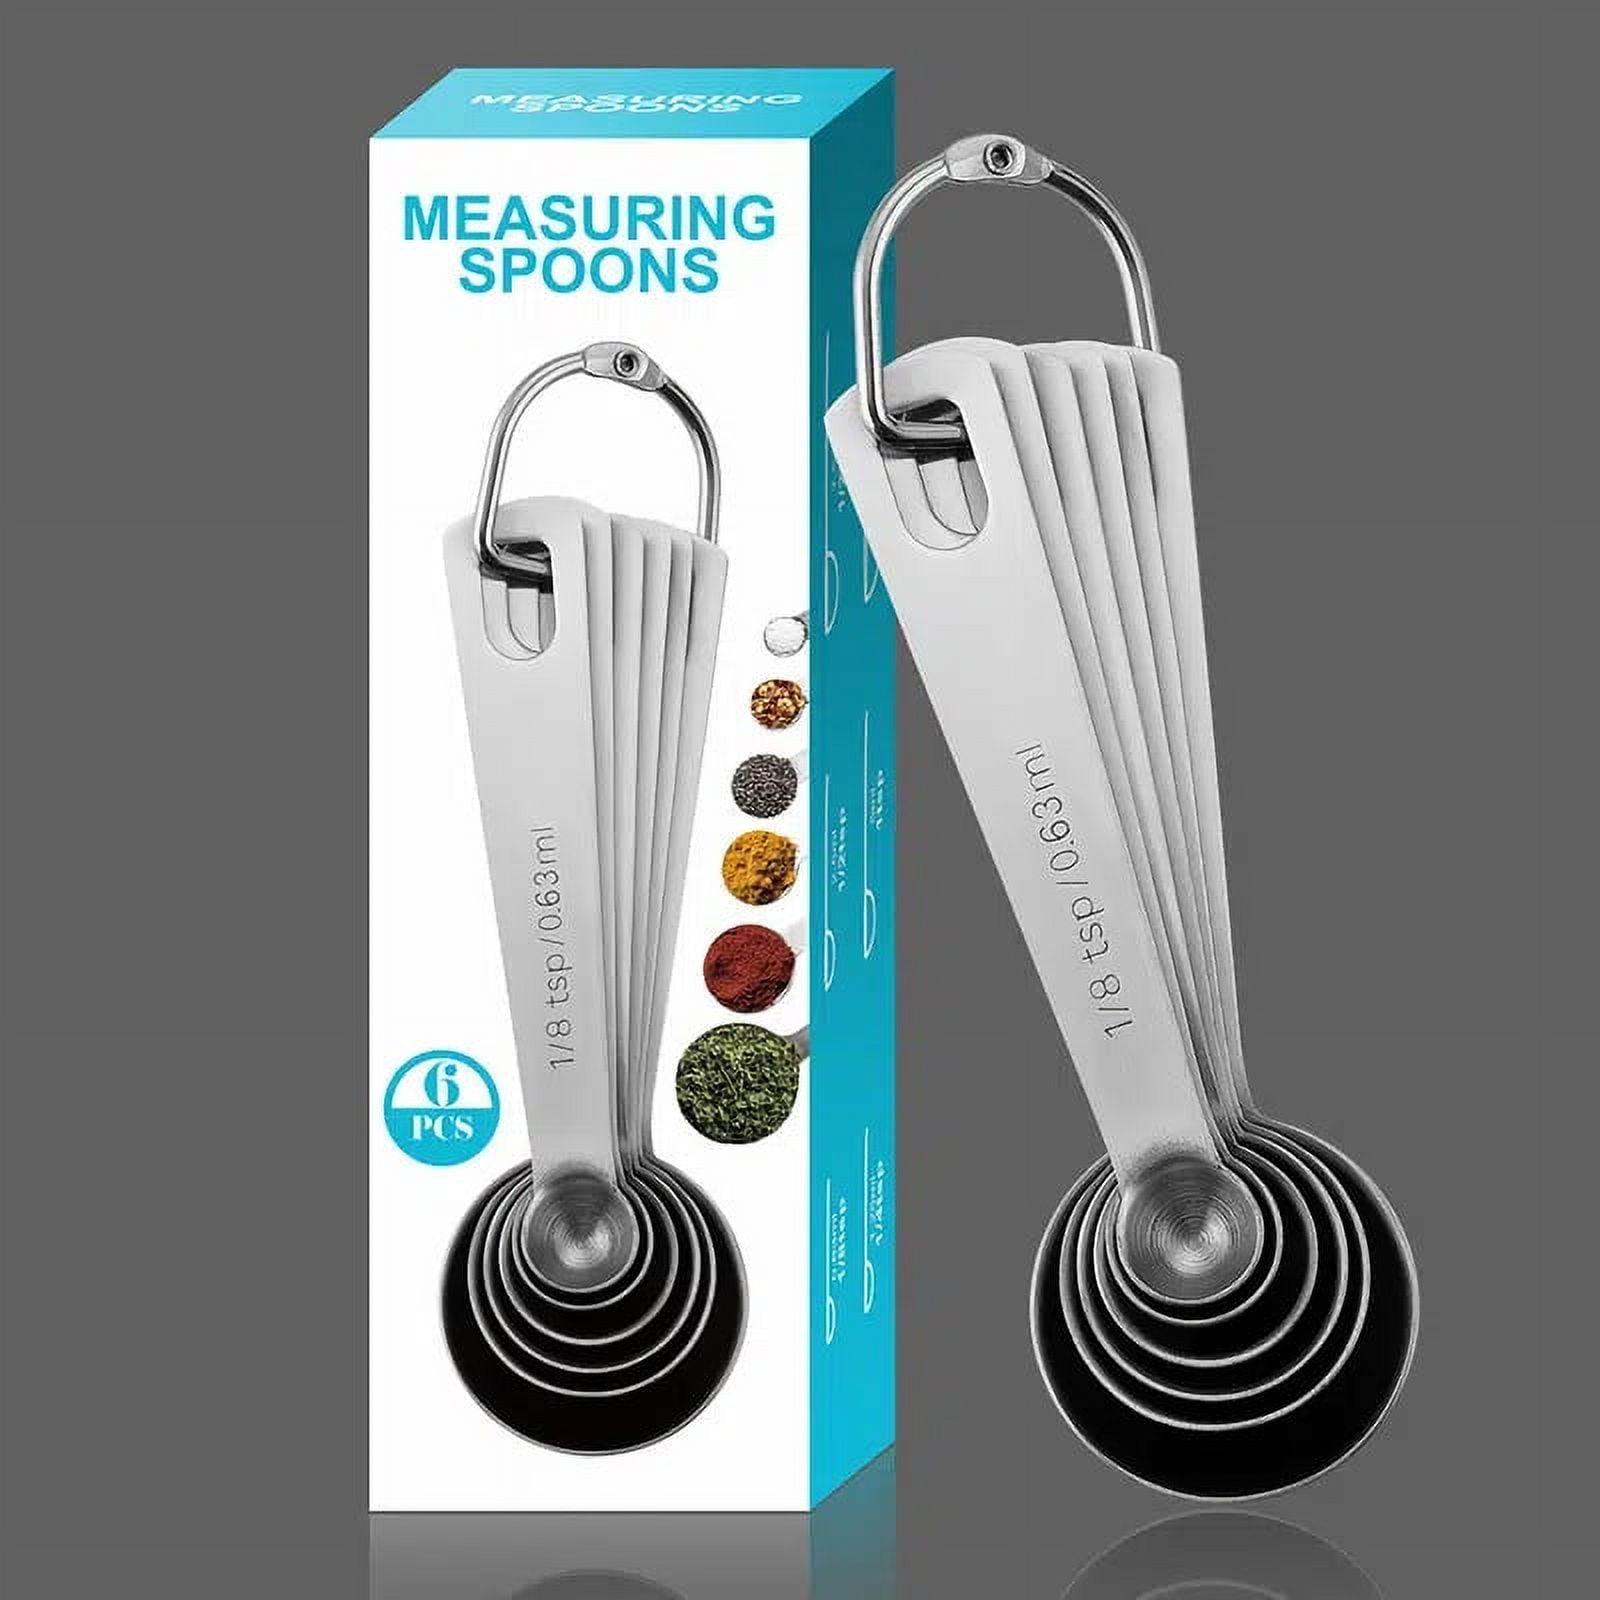 Accurate 18/8 Stainless Steel Measuring Spoons, Heavy Duty Good Handle Set  of 6 Measuring Spoon with Ring Connector, Silver